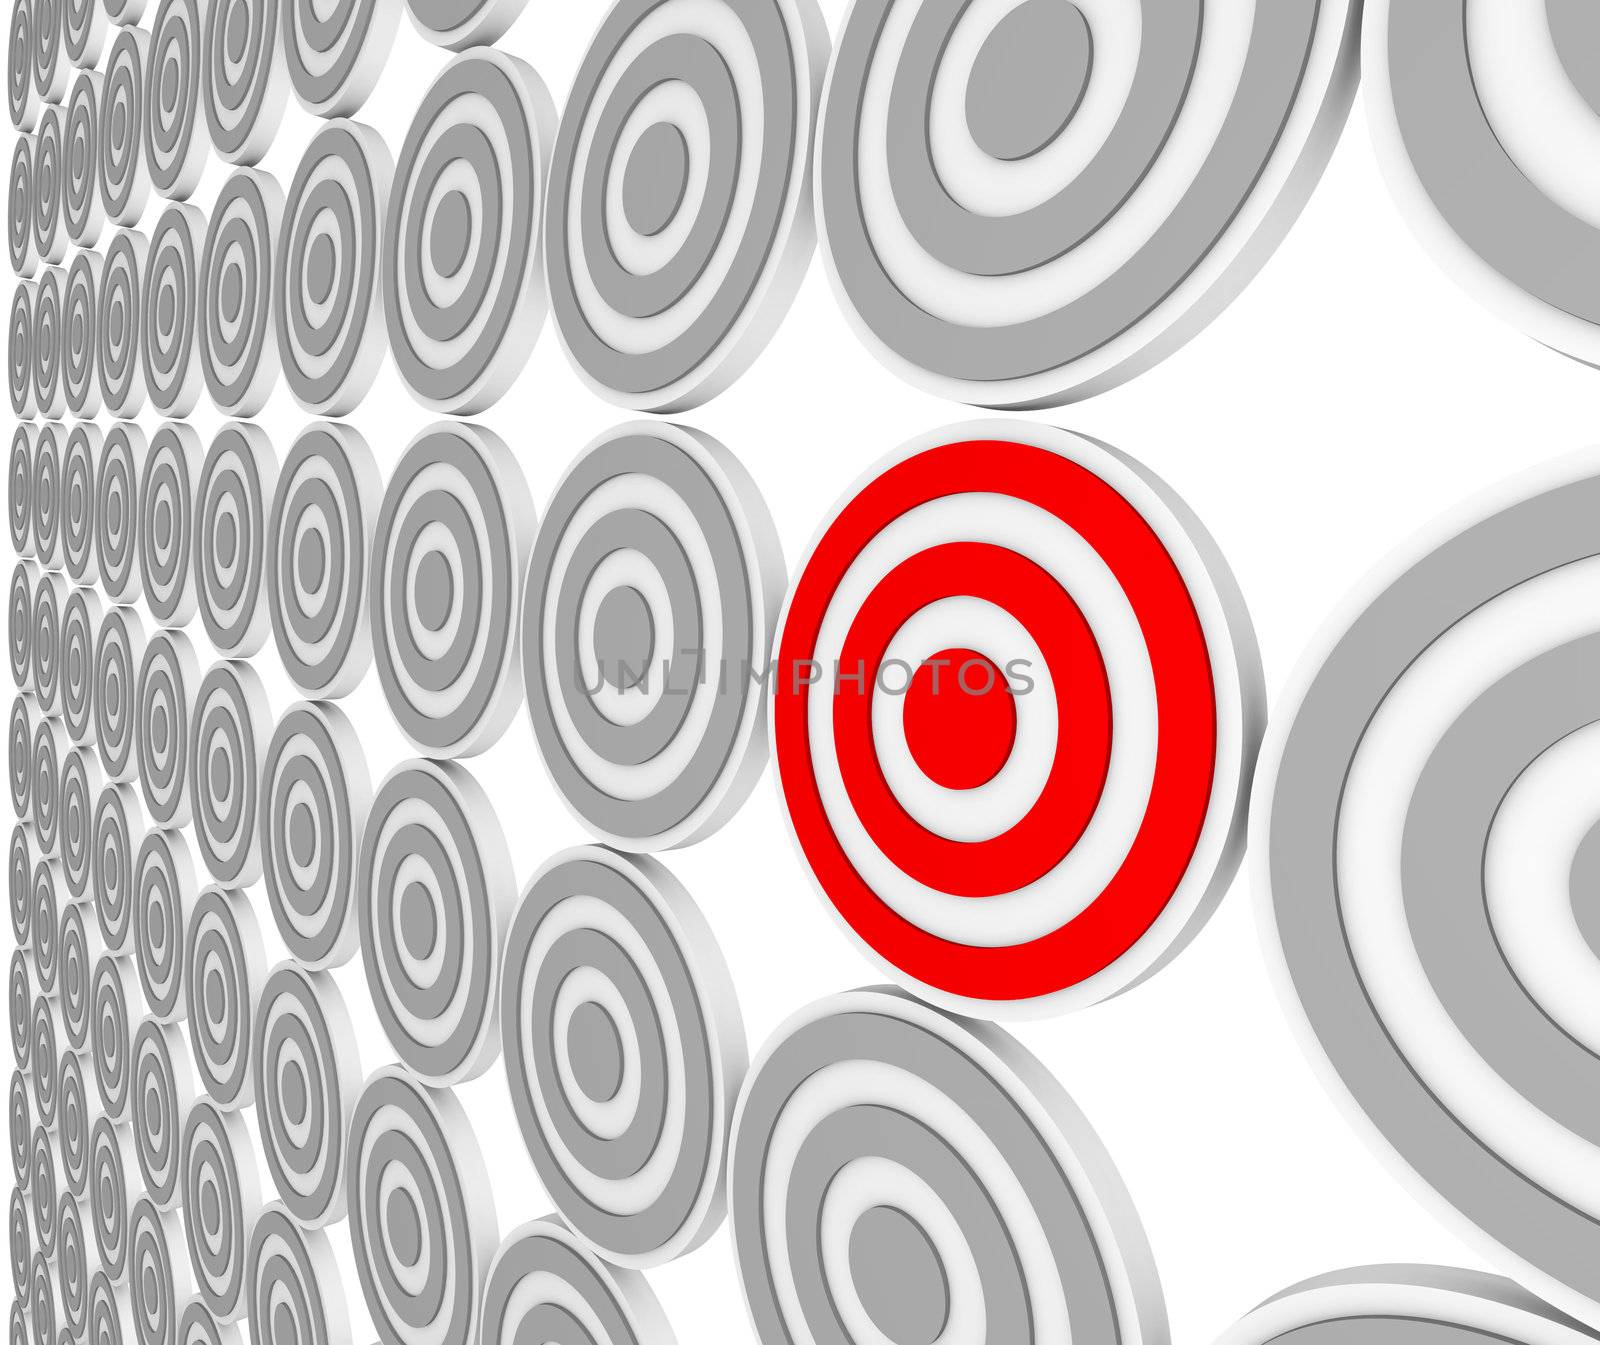 Many bulls-eye targets in rows and one in red representing a niche market in a crowded marketplace of demographics and customers.  Pinpoint the right audience for your marketing message.